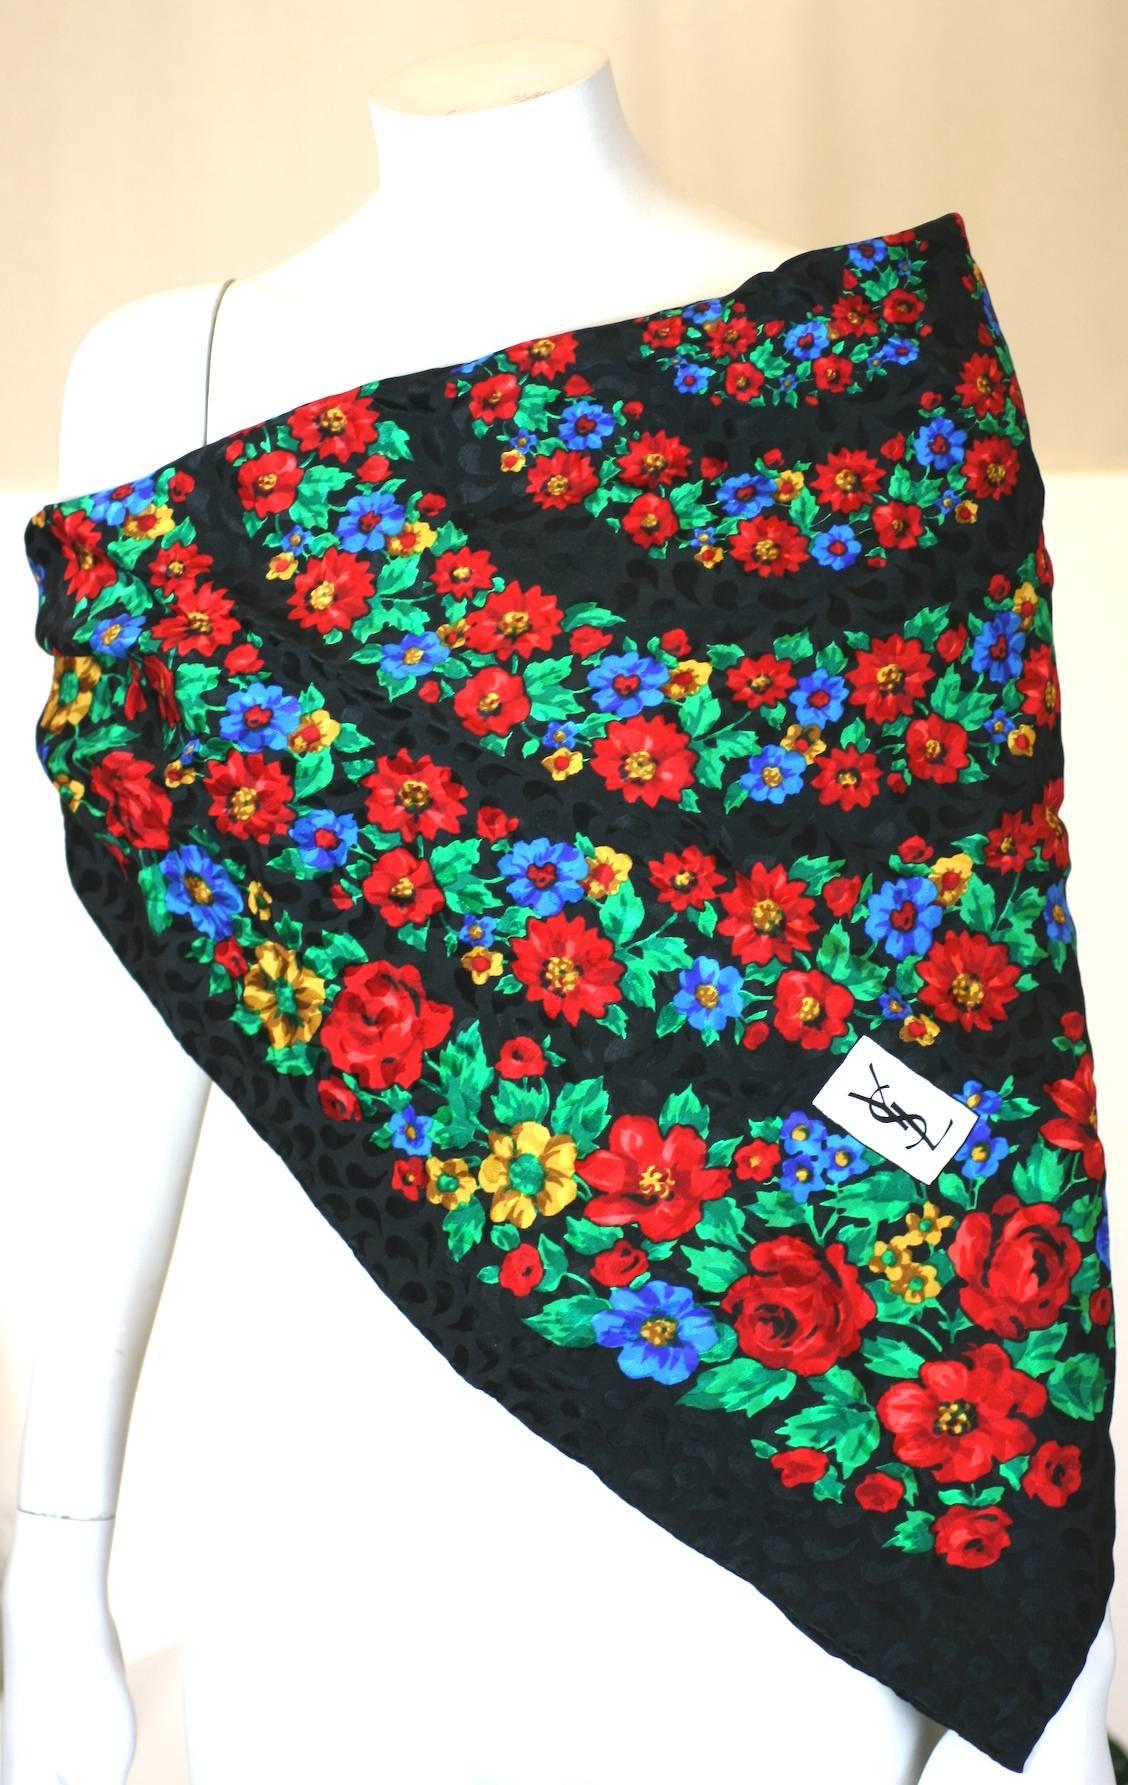 Yves Saint Laurent Russian inspired floral printed silk square scarf. Concentric circles of multi color flowers on a black ground. Excellent Condition.
L 32"
W 32"
